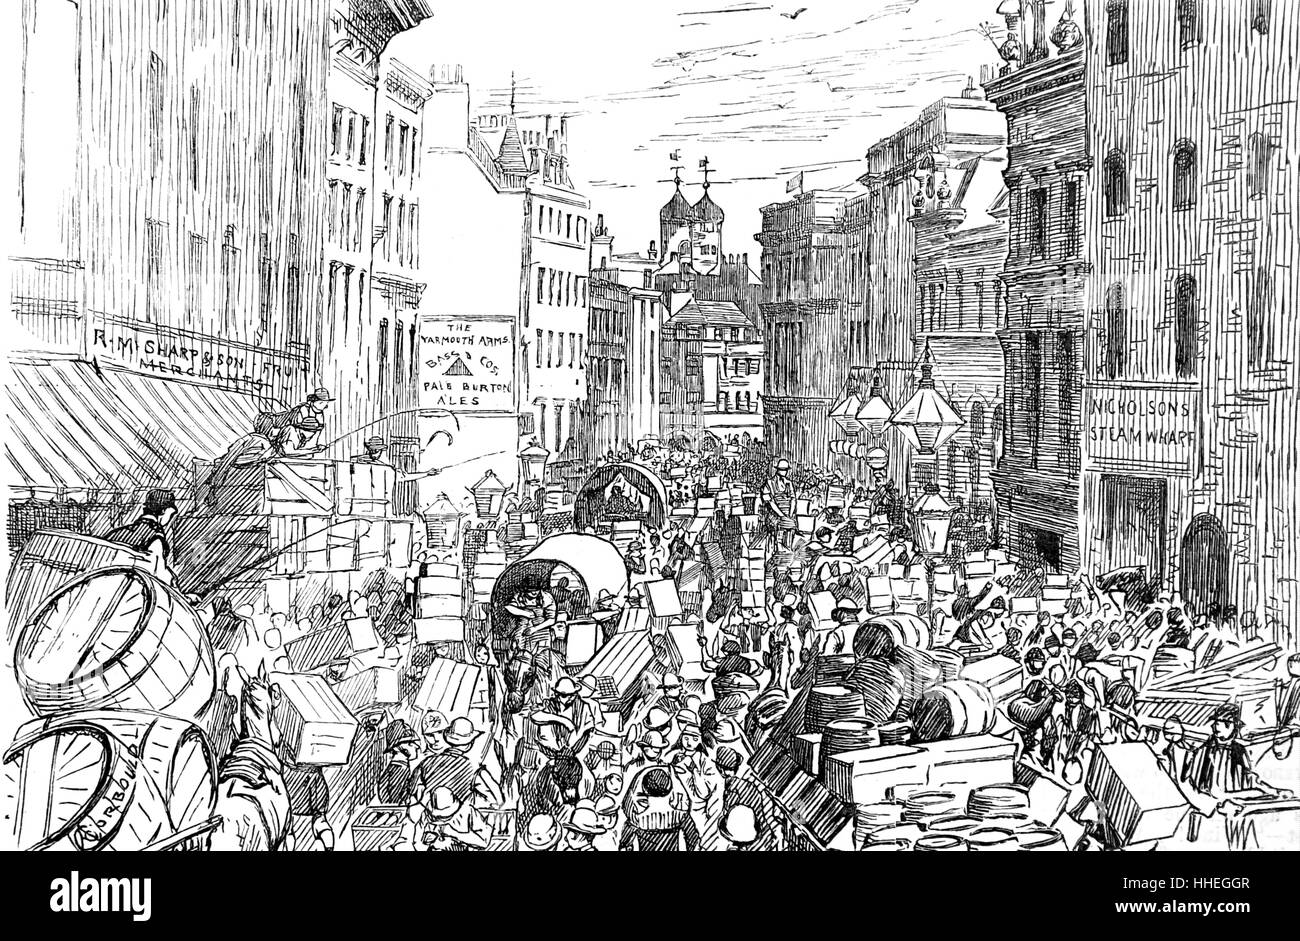 Cartoon depicting Nicholson's Wharf crowded with traffic. Dated 19th Century Stock Photo